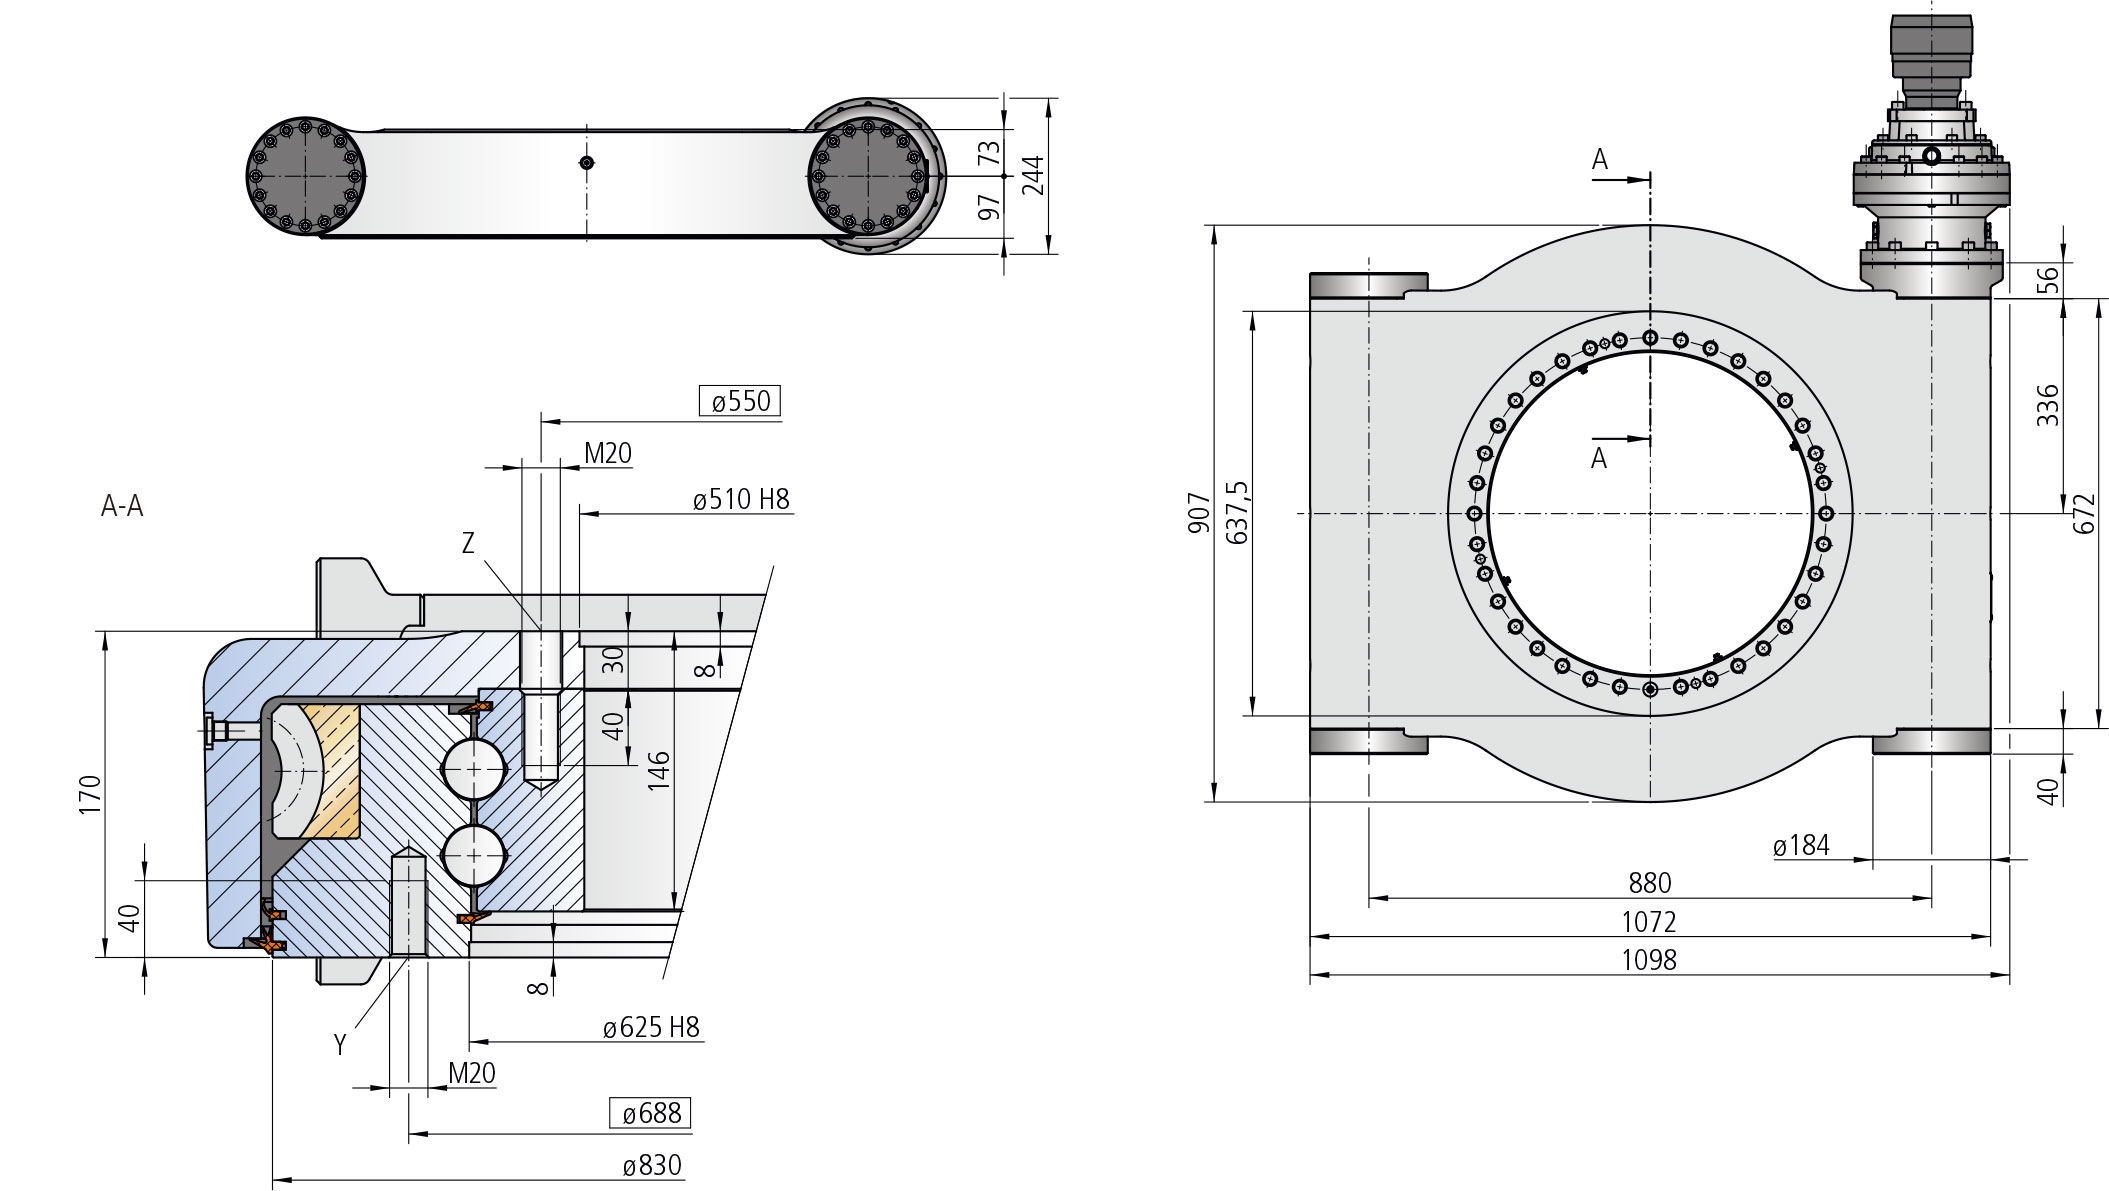 WD-LC 0620 / 2-row / 1 drive WD-L Series cad drawing